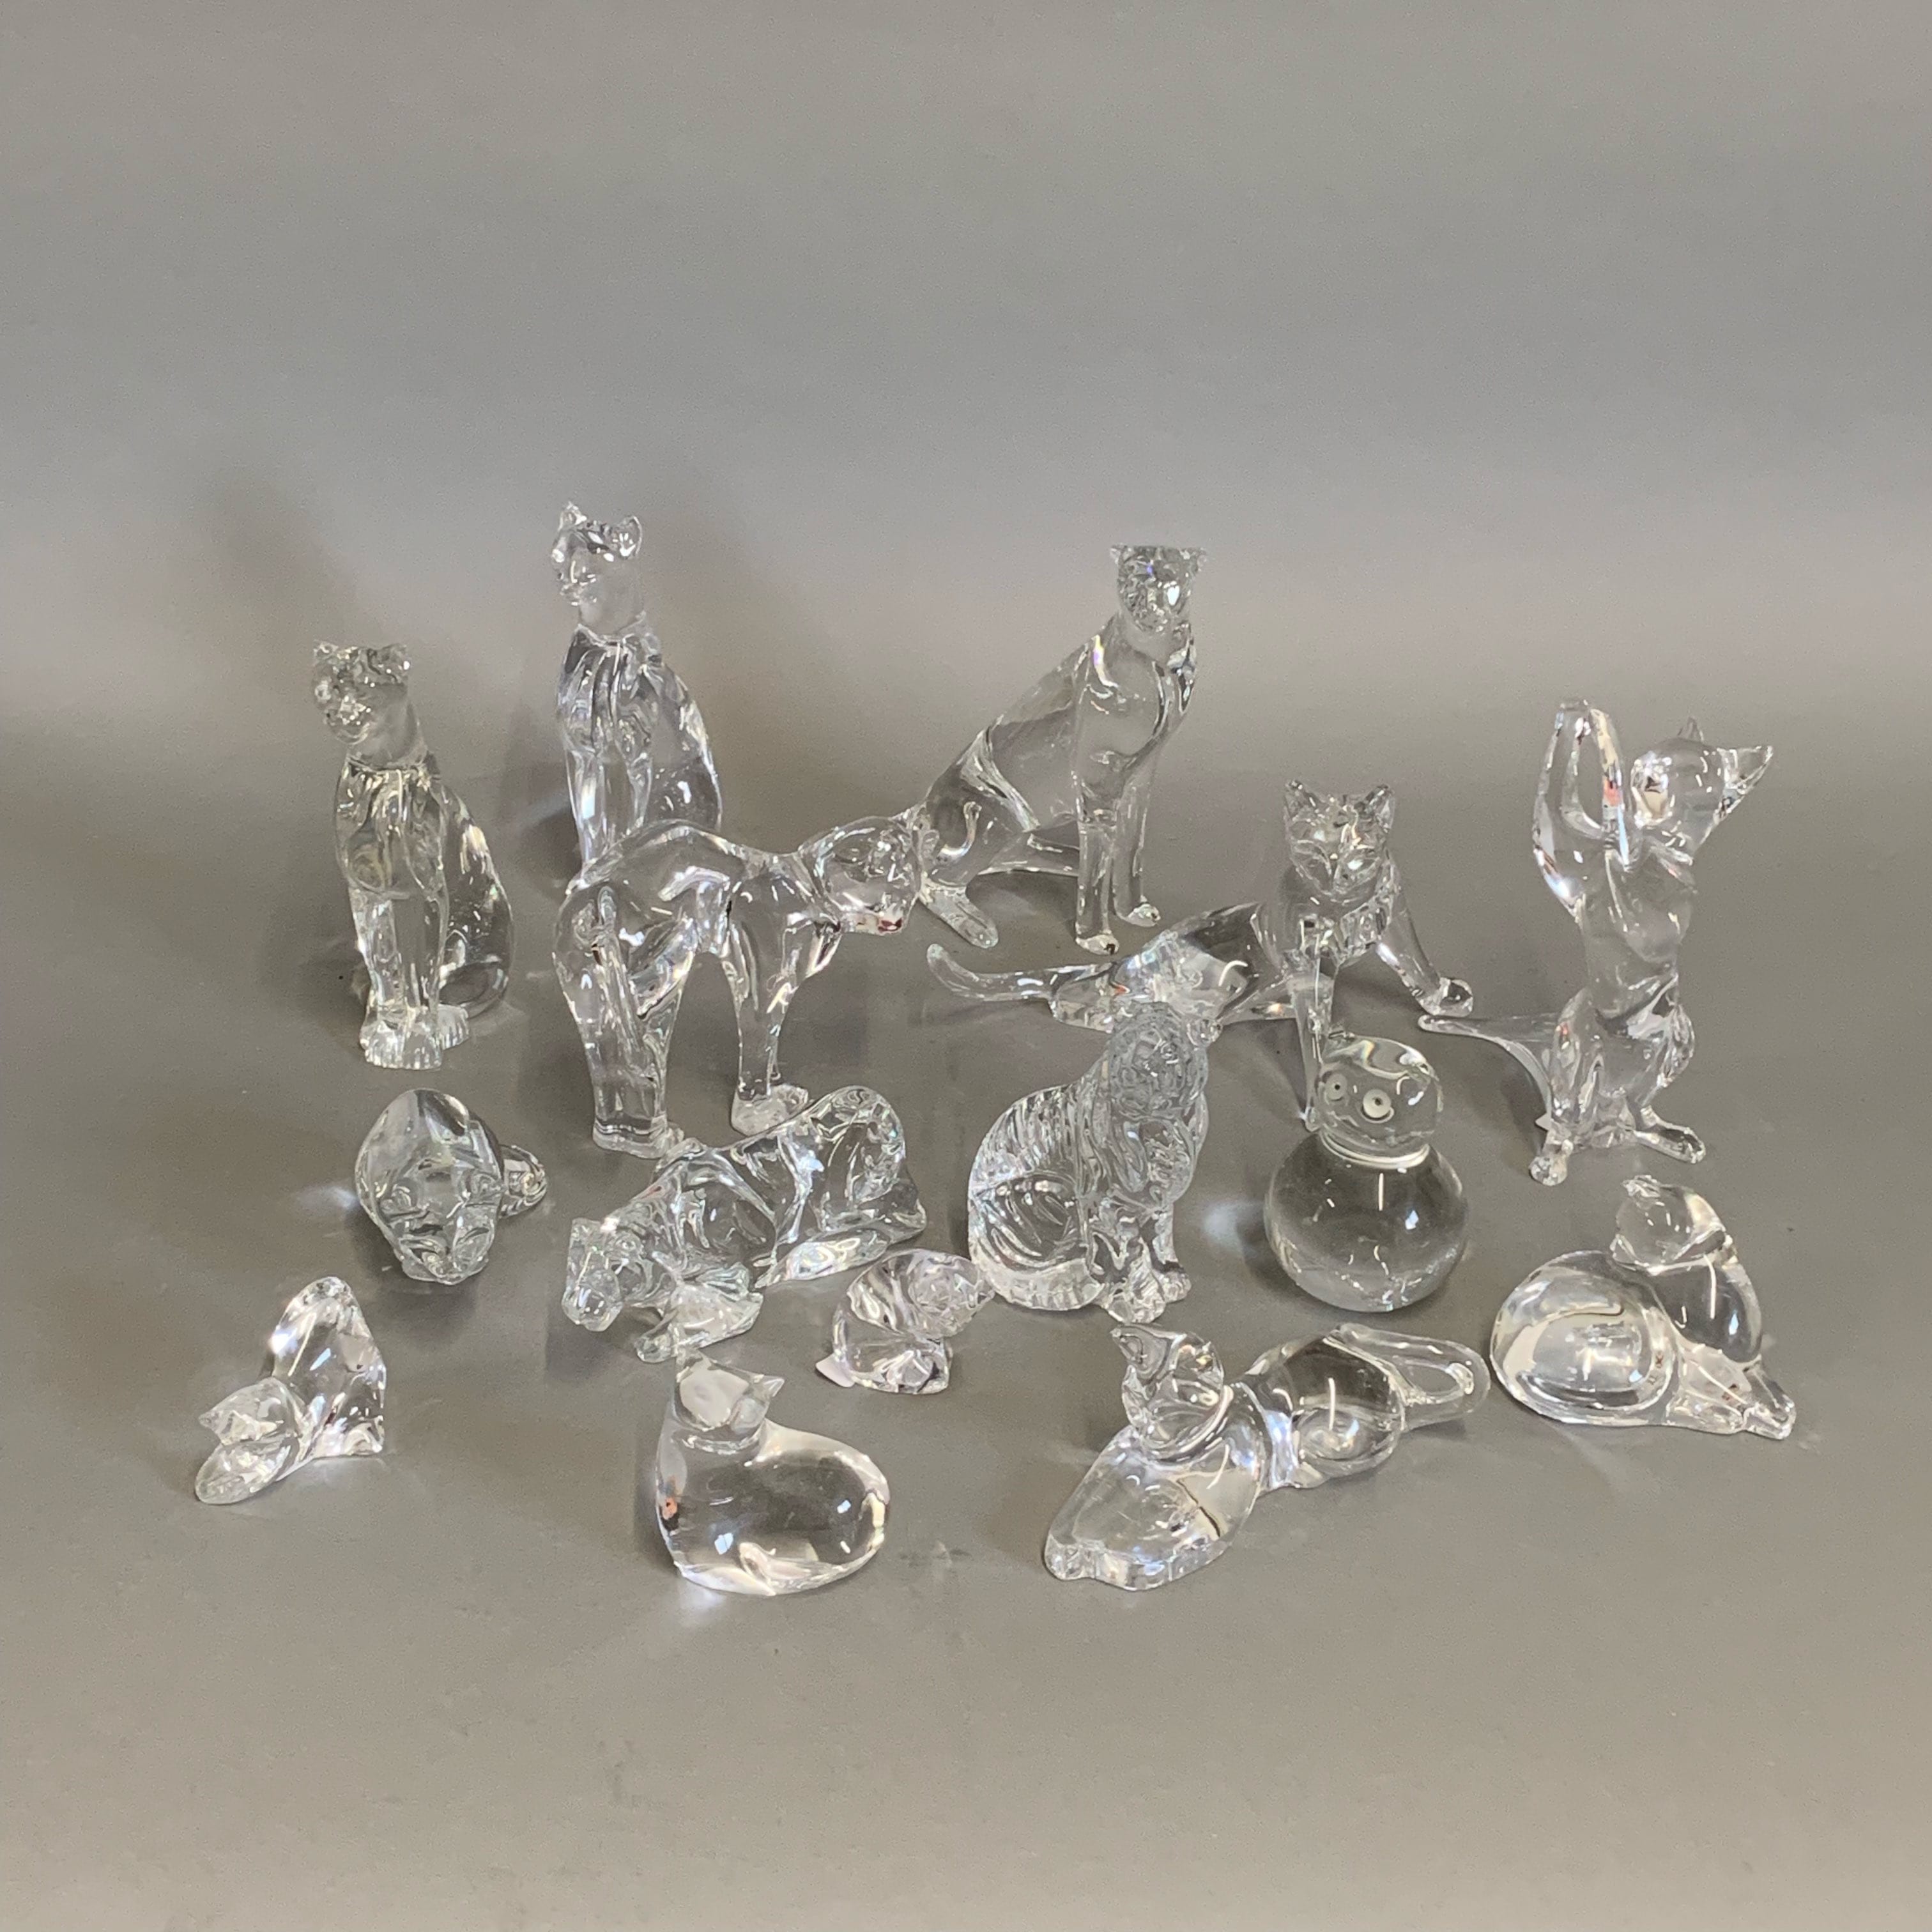 Lot 125: Group of 15 Baccarat Crystal Cat Figurines